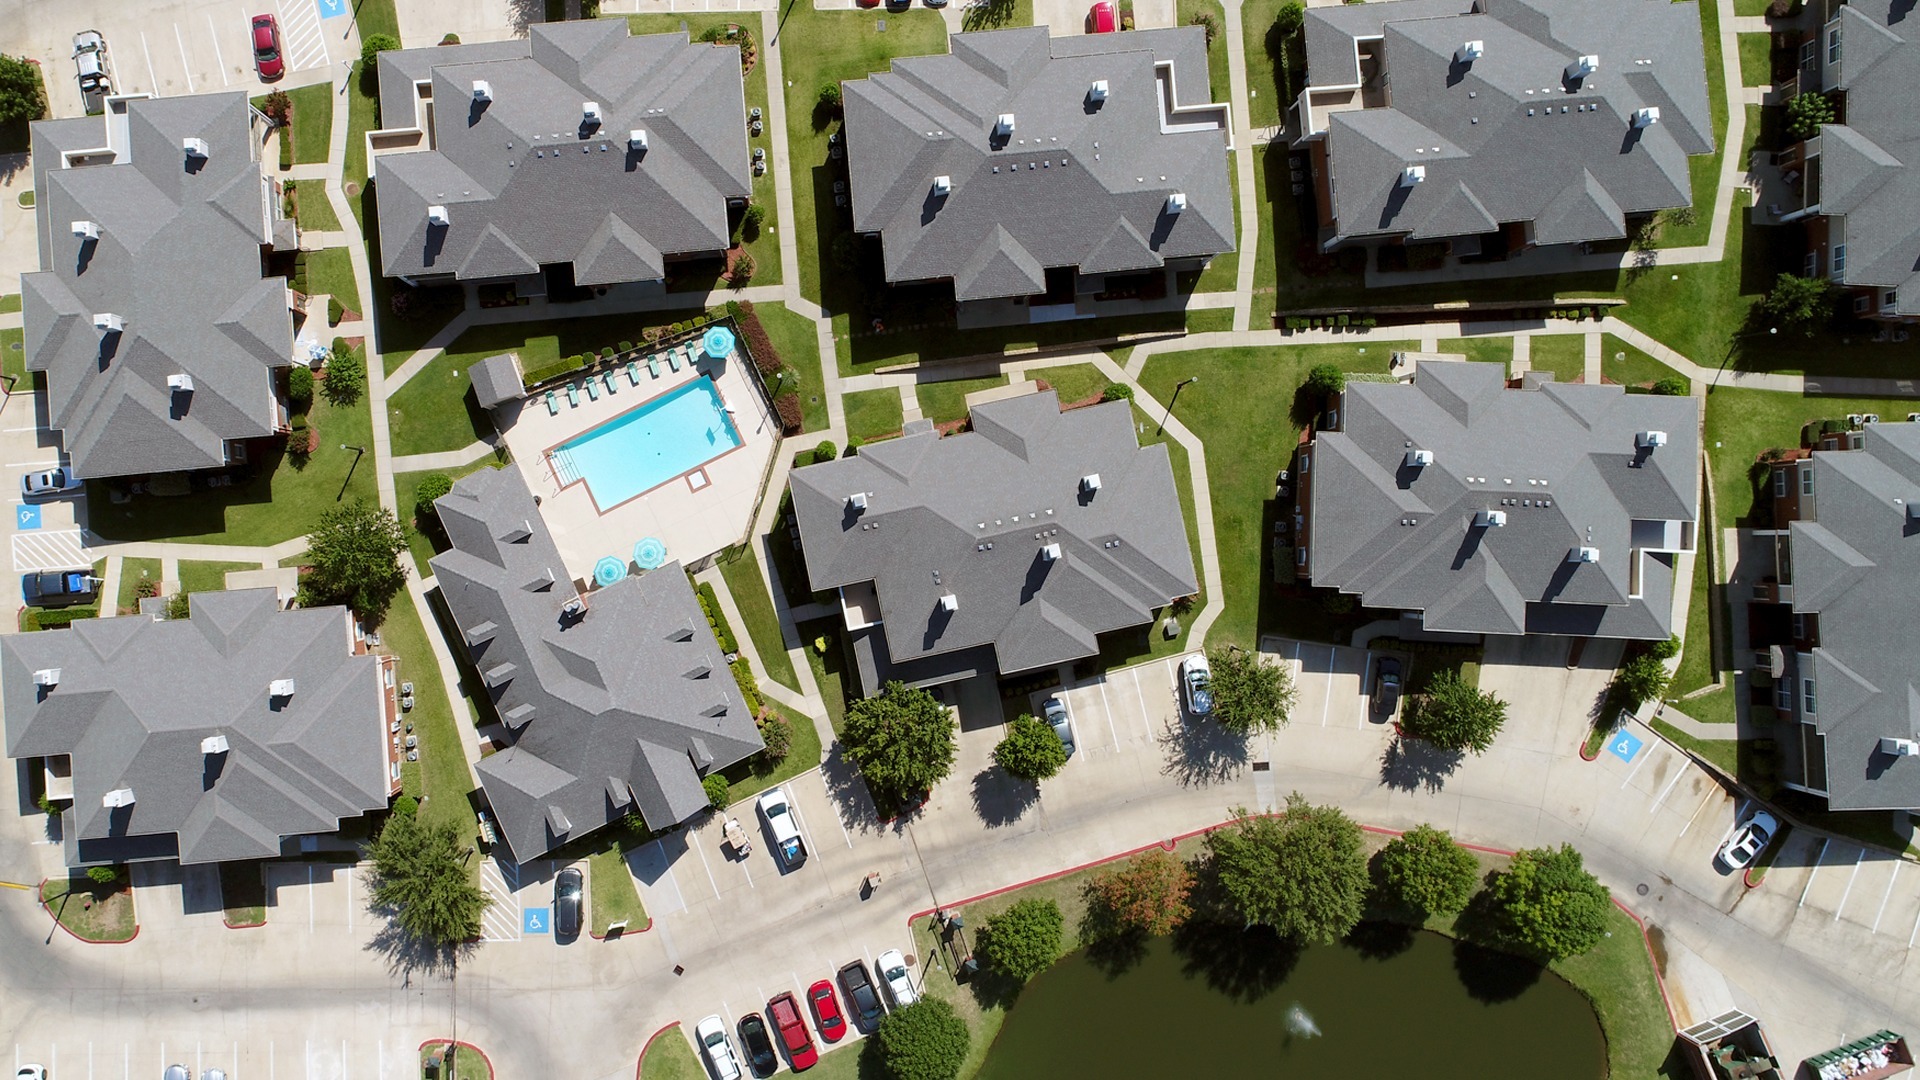 Arial shot of apartments where only the roofs are visible with paths between buildings, green grass, trees, and the community area with the pool